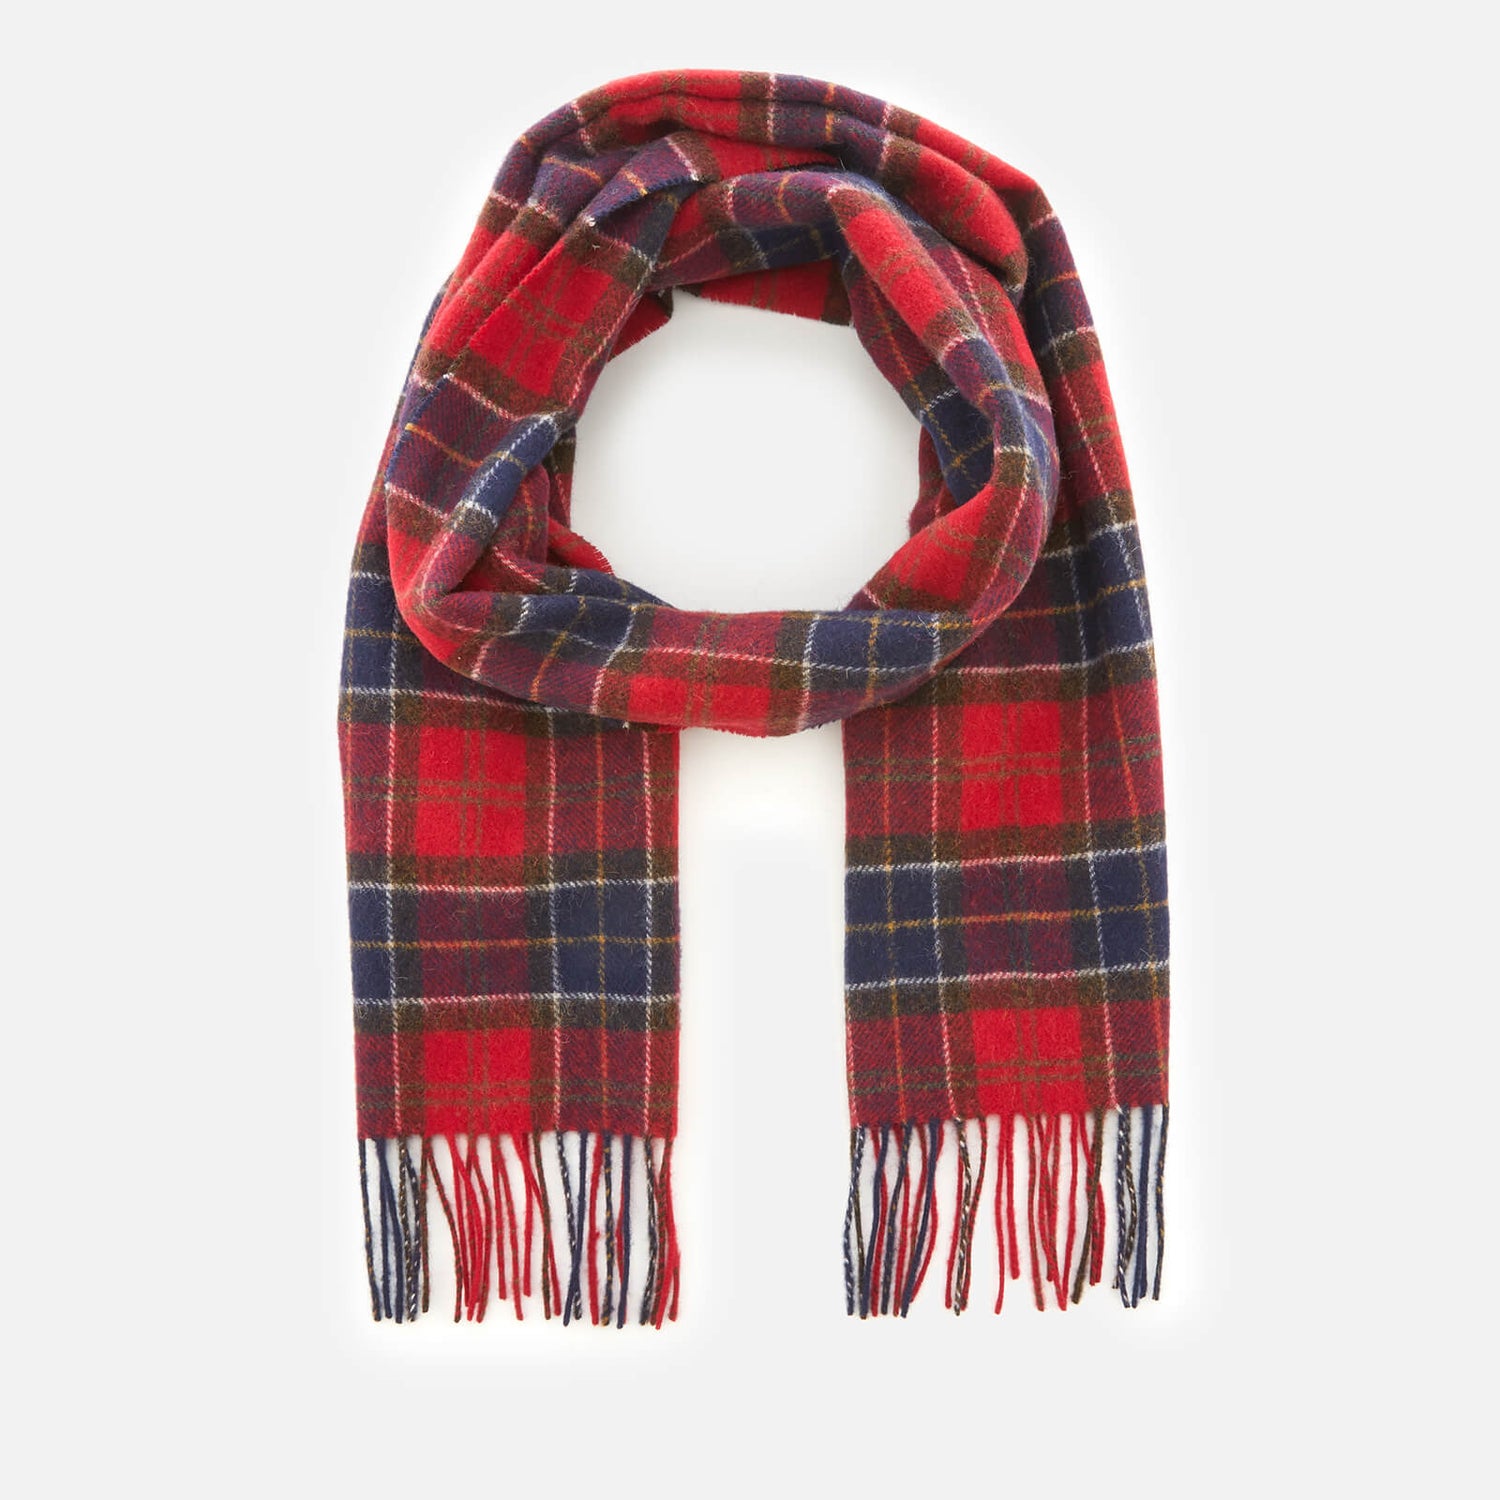 Barbour Men's Tartan Lambswool Scarf - Red - Free UK Delivery Available